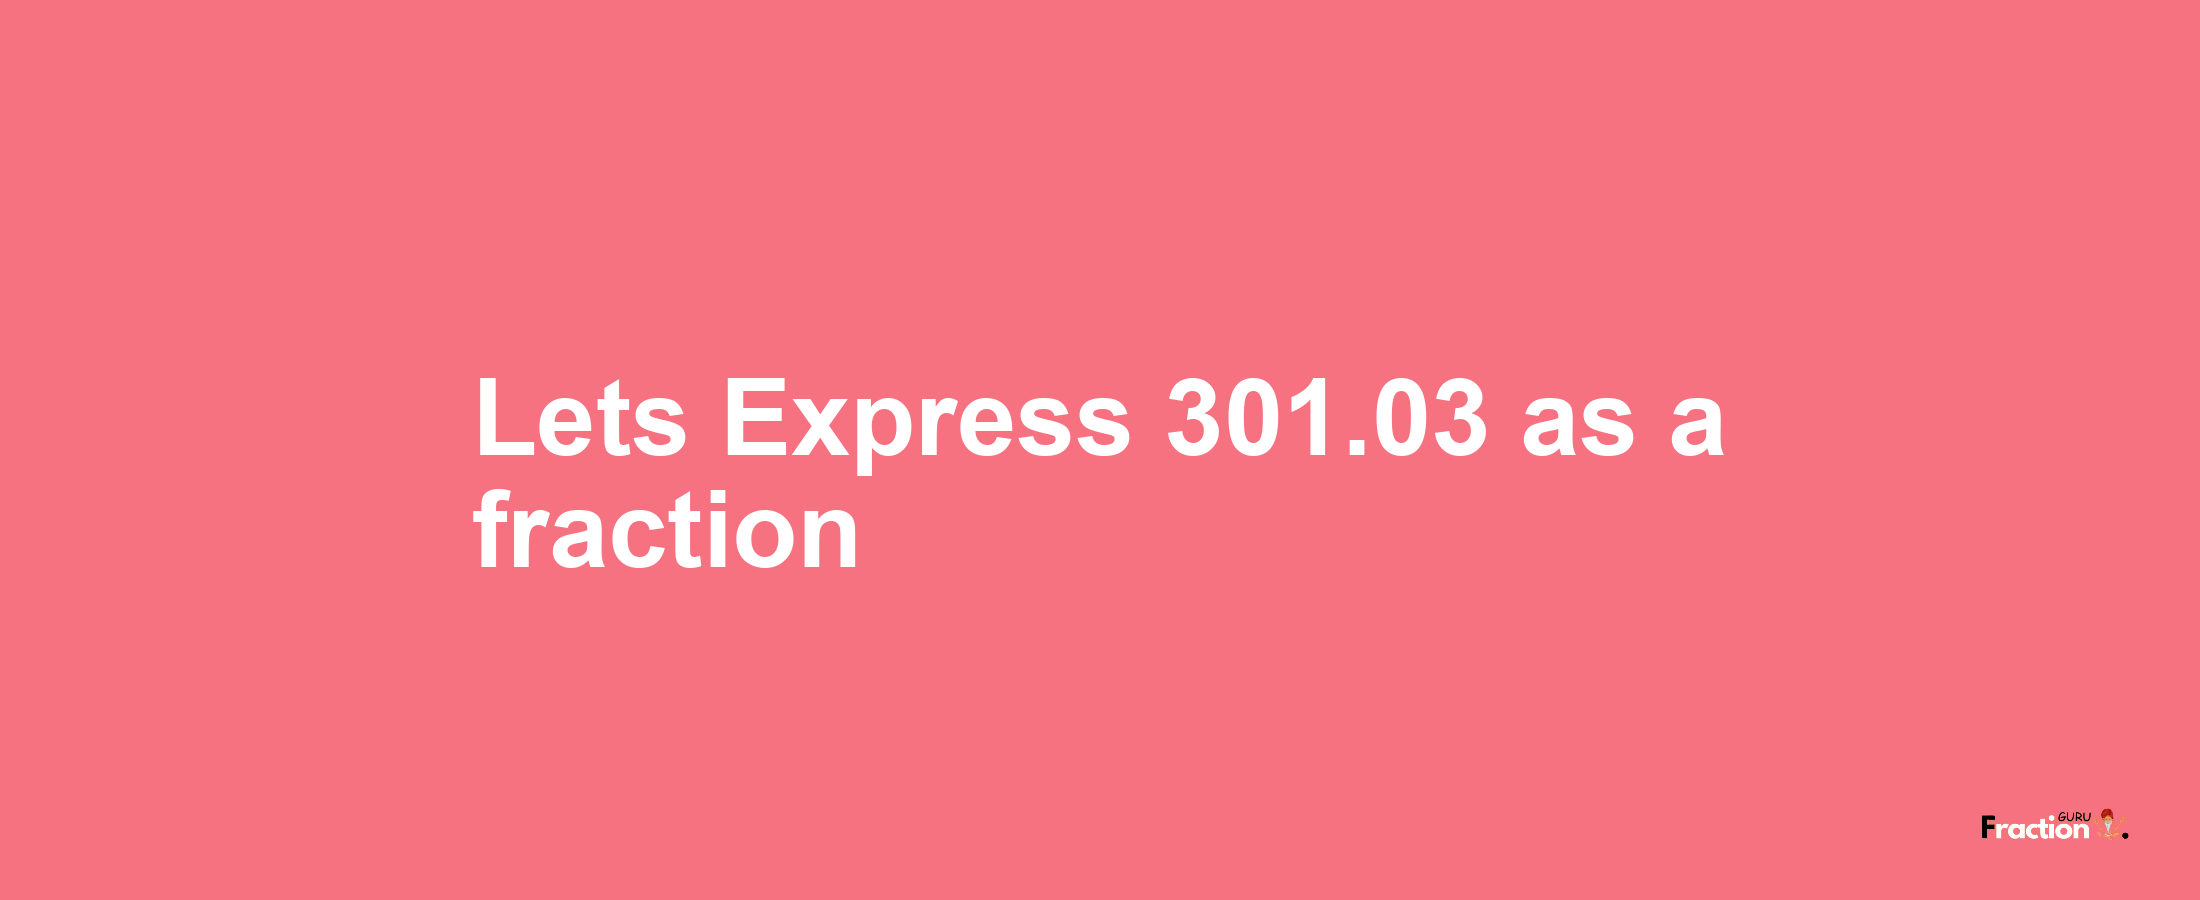 Lets Express 301.03 as afraction